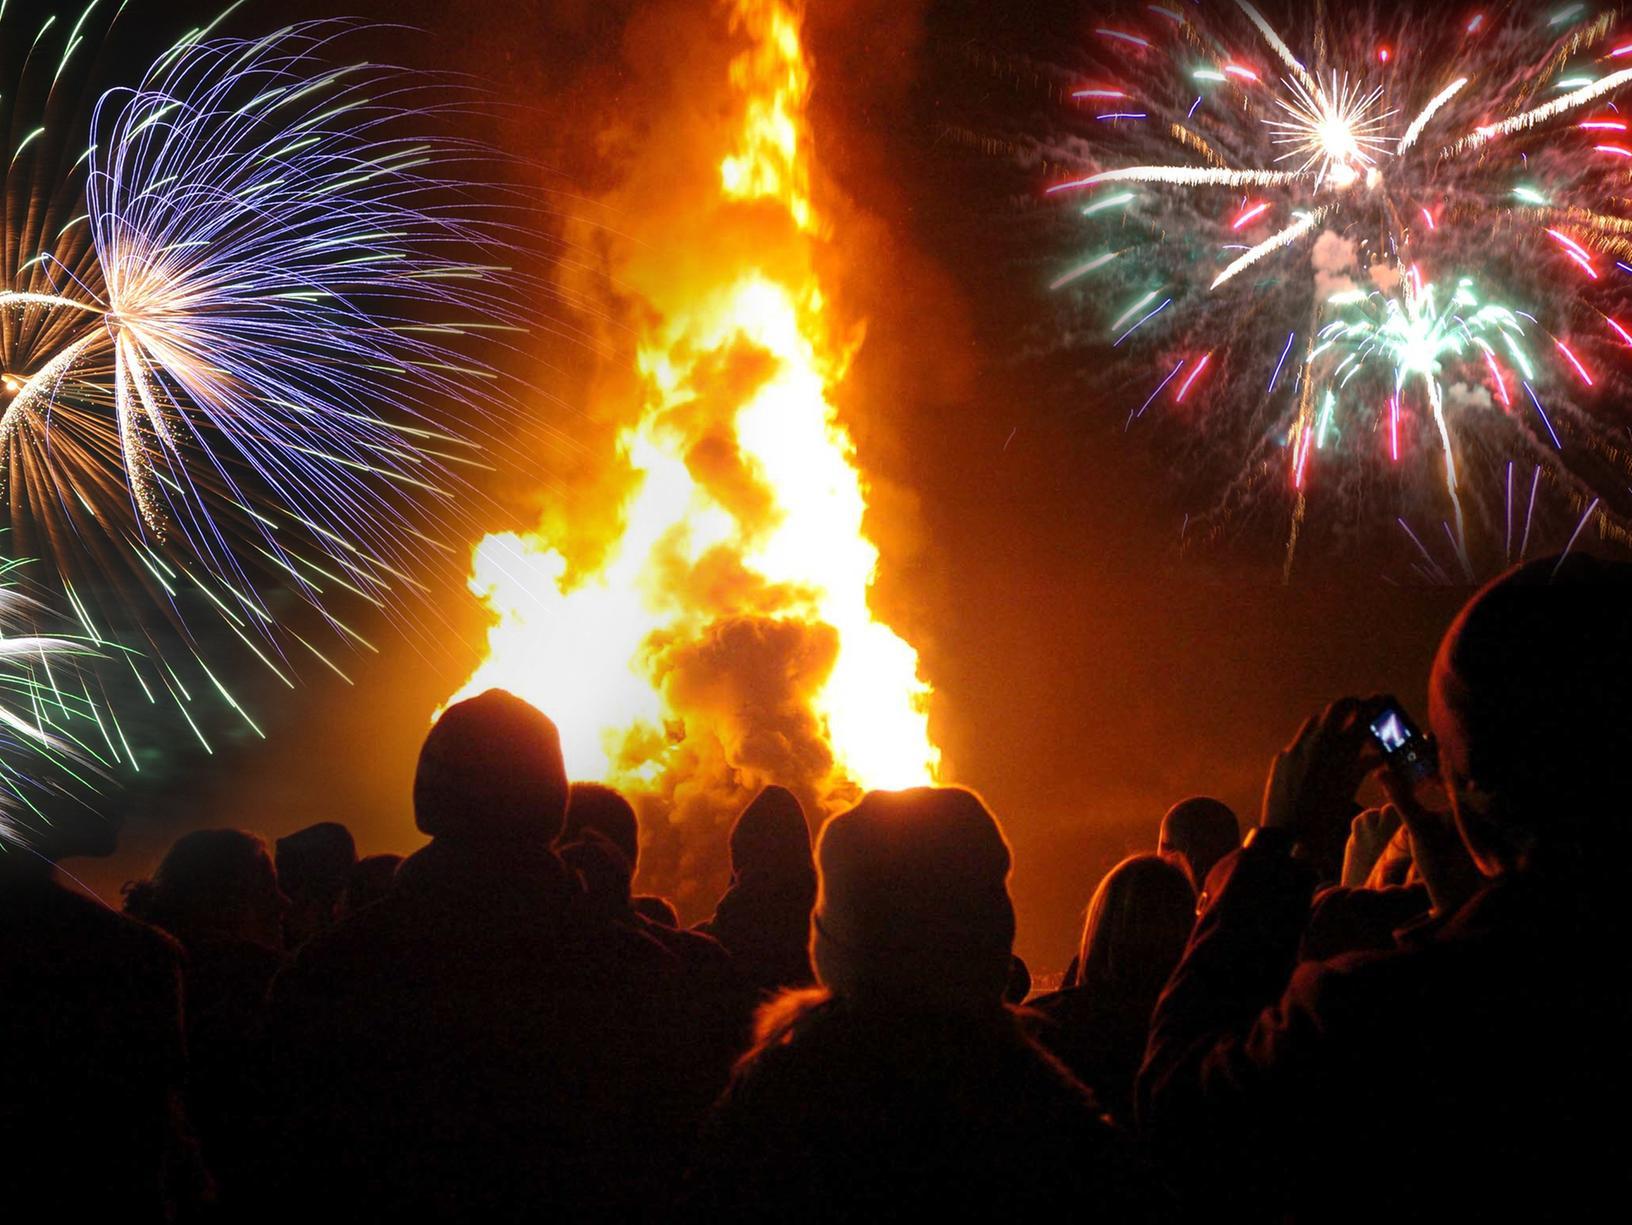 Held on Tuesday, November 5. The bonfire will be lit at 7pm with the fireworks display starting at 7.30pm. Cost: free